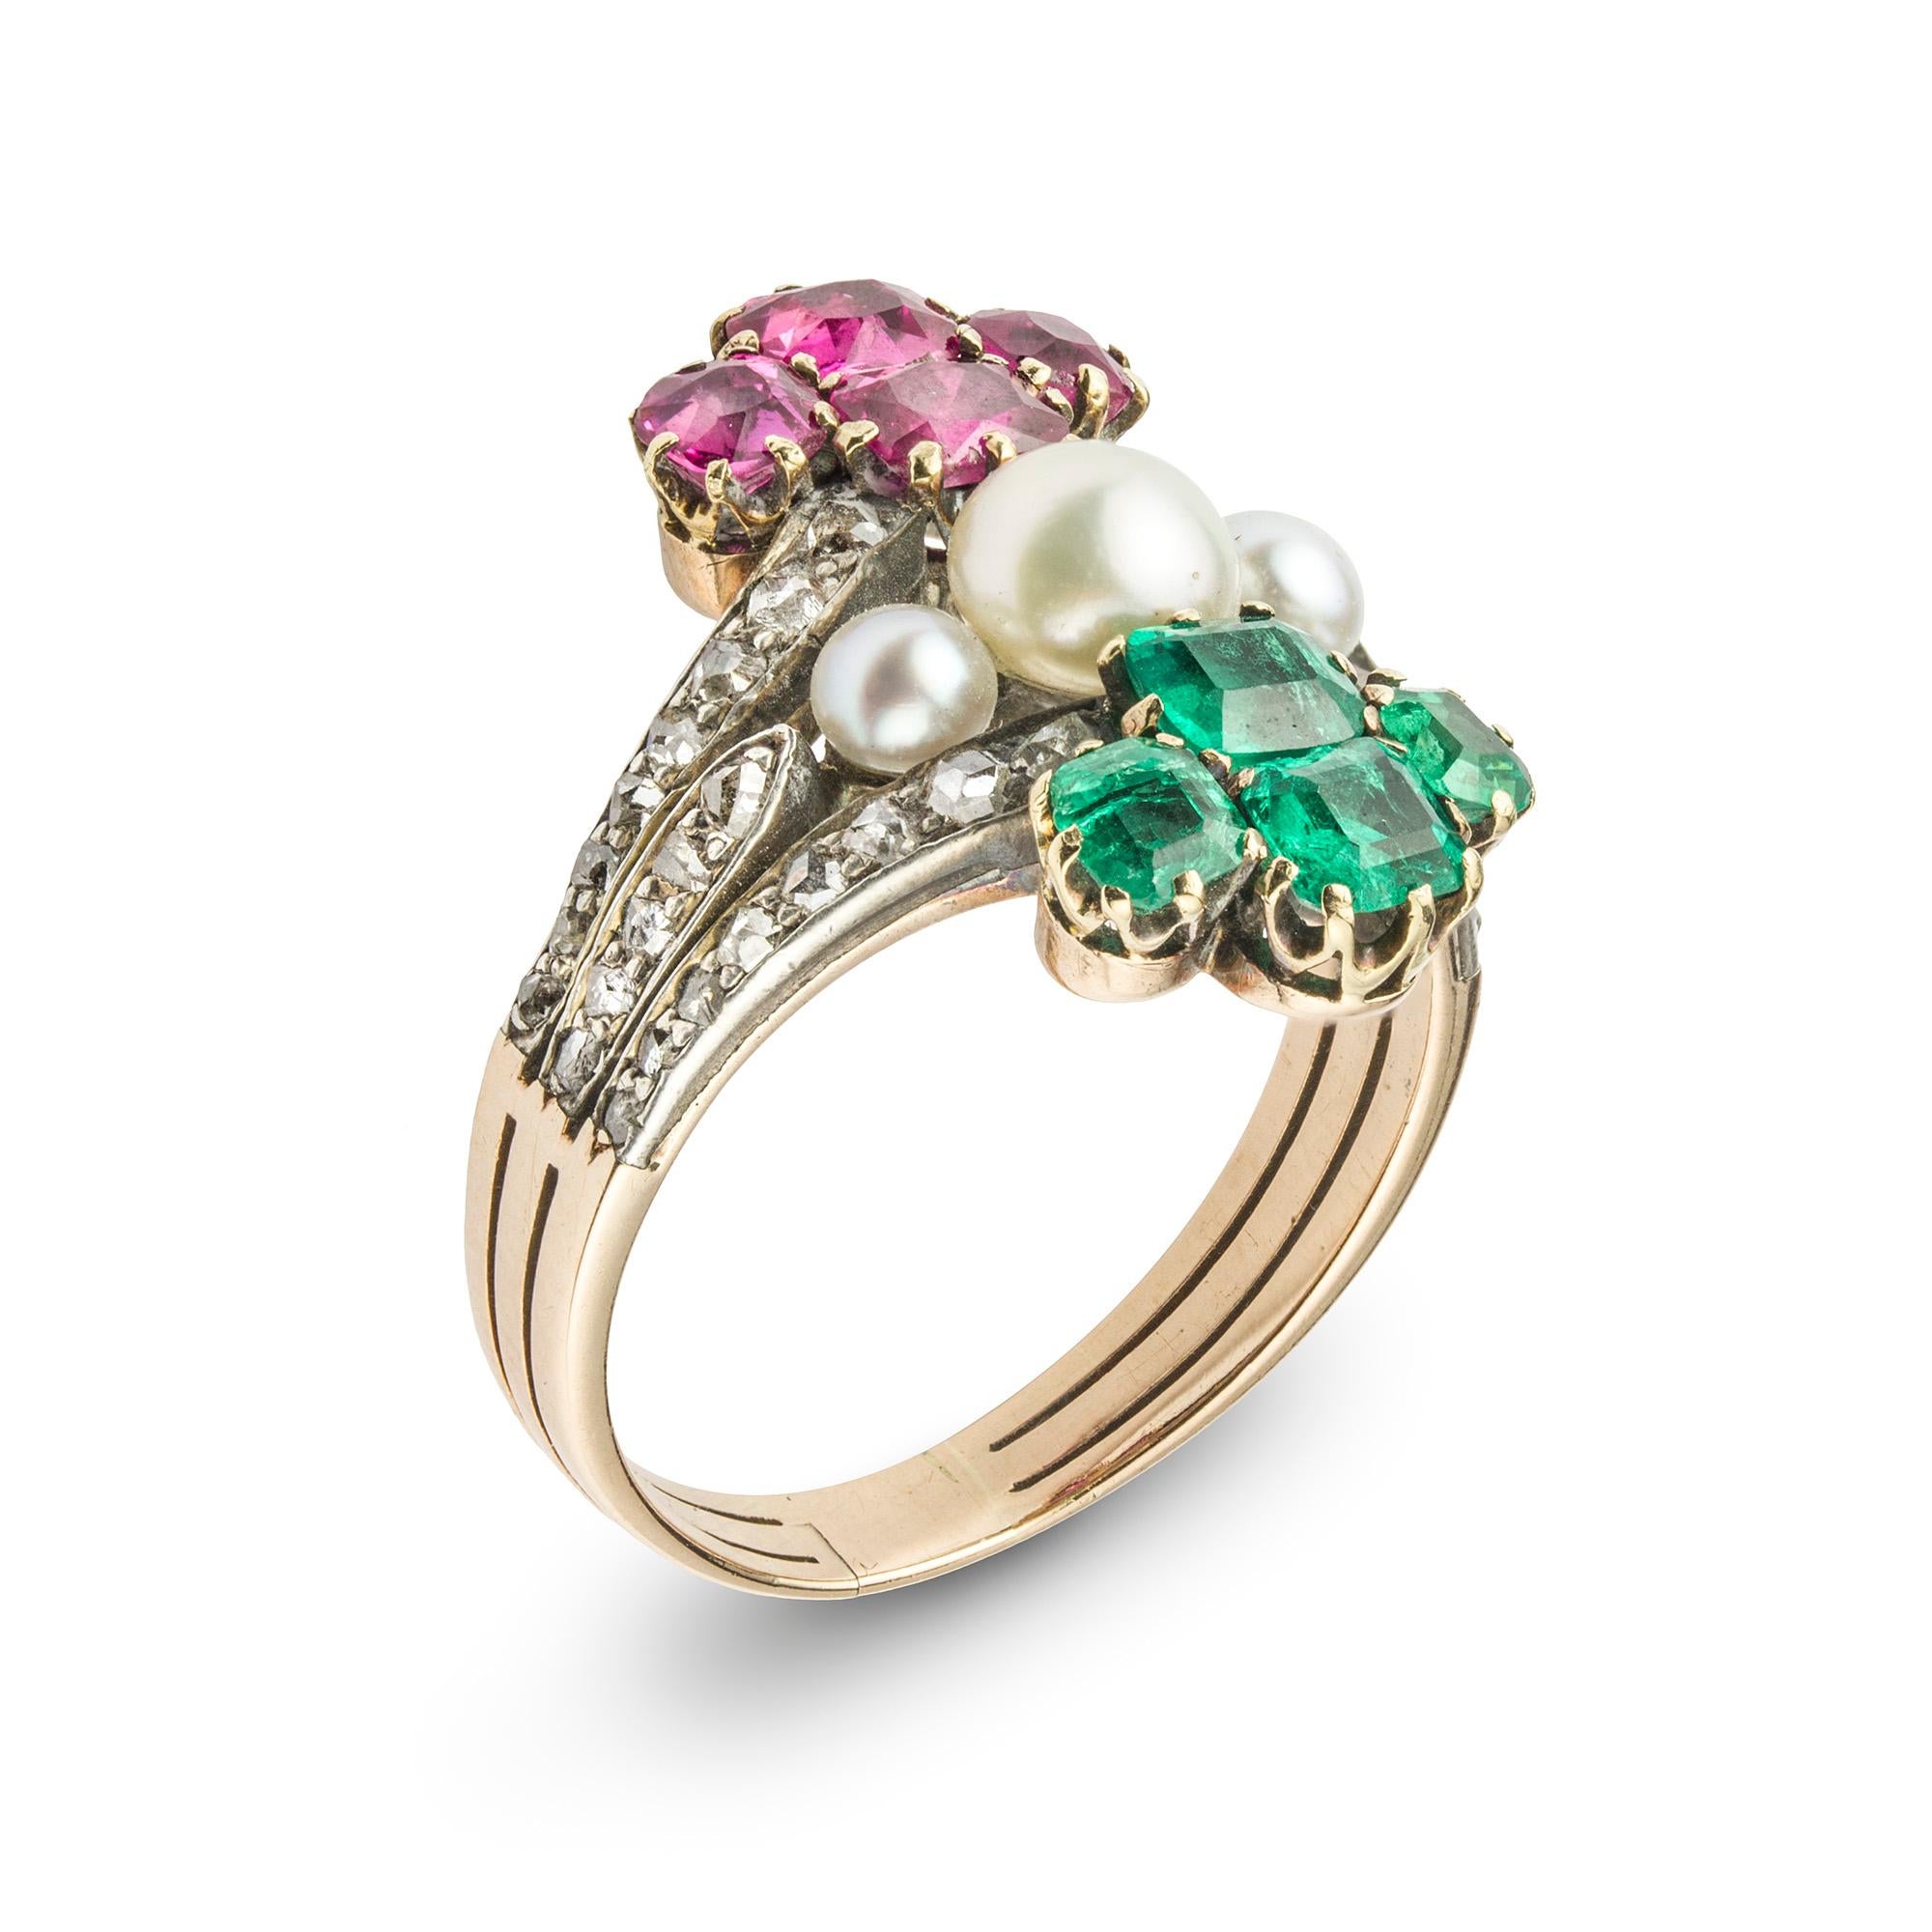 A mid nineteenth century emerald, ruby, diamond and bouton pearl ring, comprising a claw-set emerald quatrefoil surmounting three bouton pearls in a horizontal row and with a similar claw-set ruby quatrefoil below, all mounted in vertical alignment